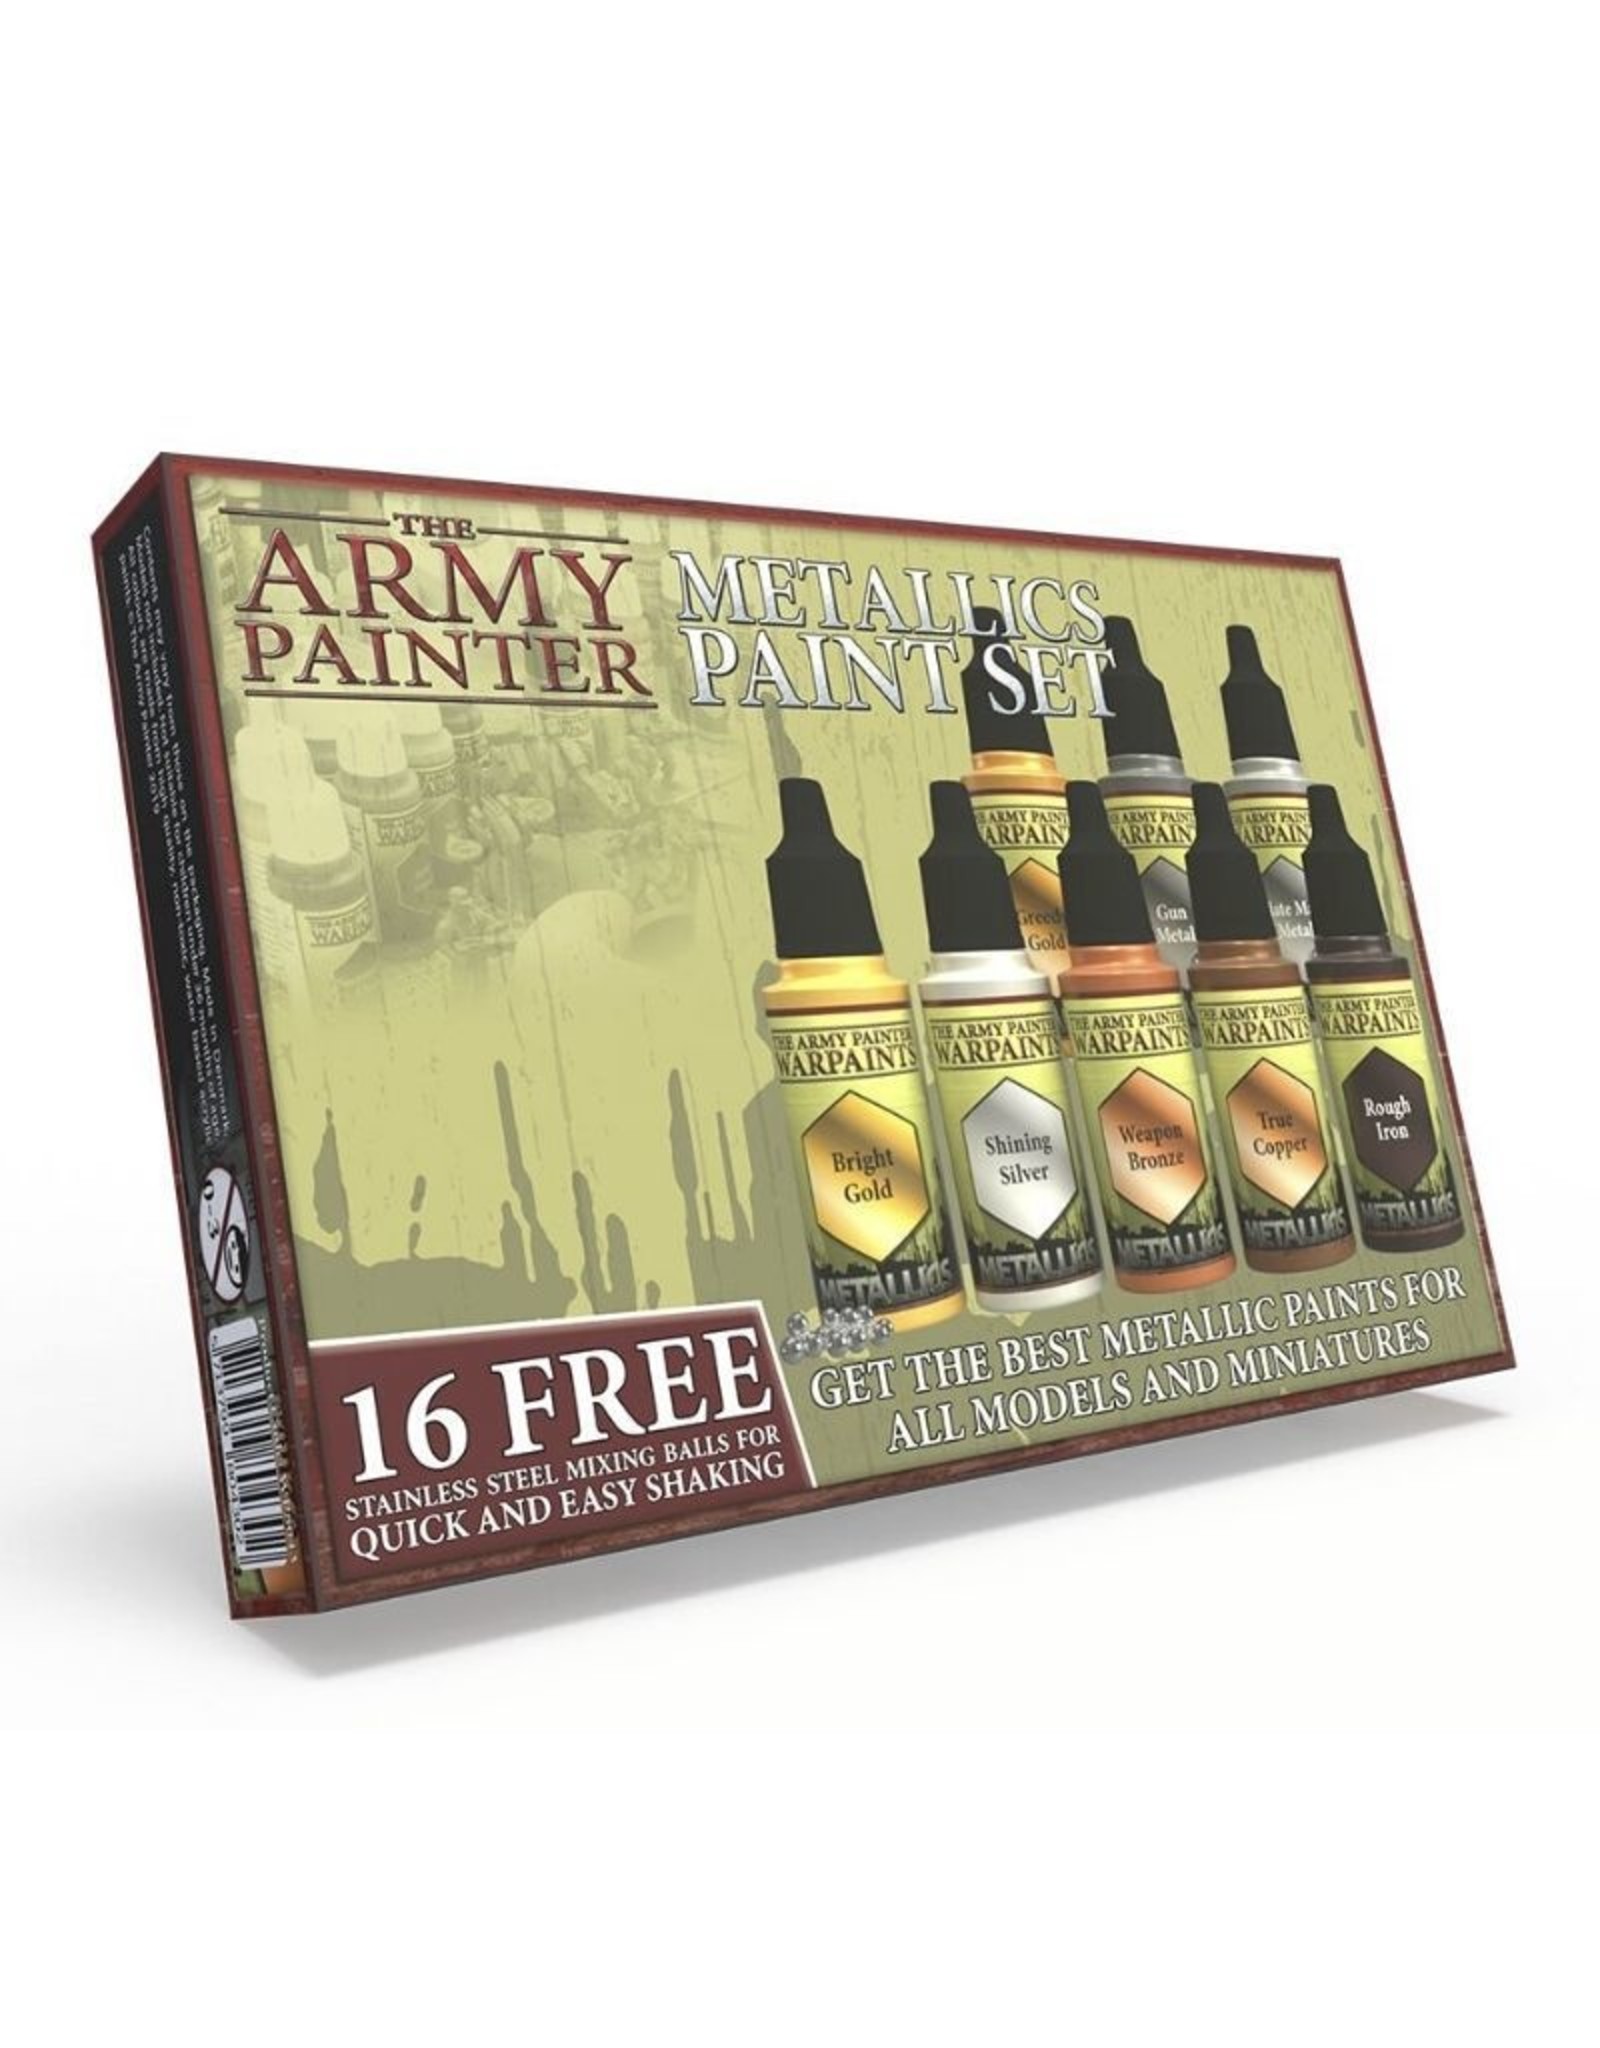 D&D Adventurers Paint Set with a free miniature - The Army Painter